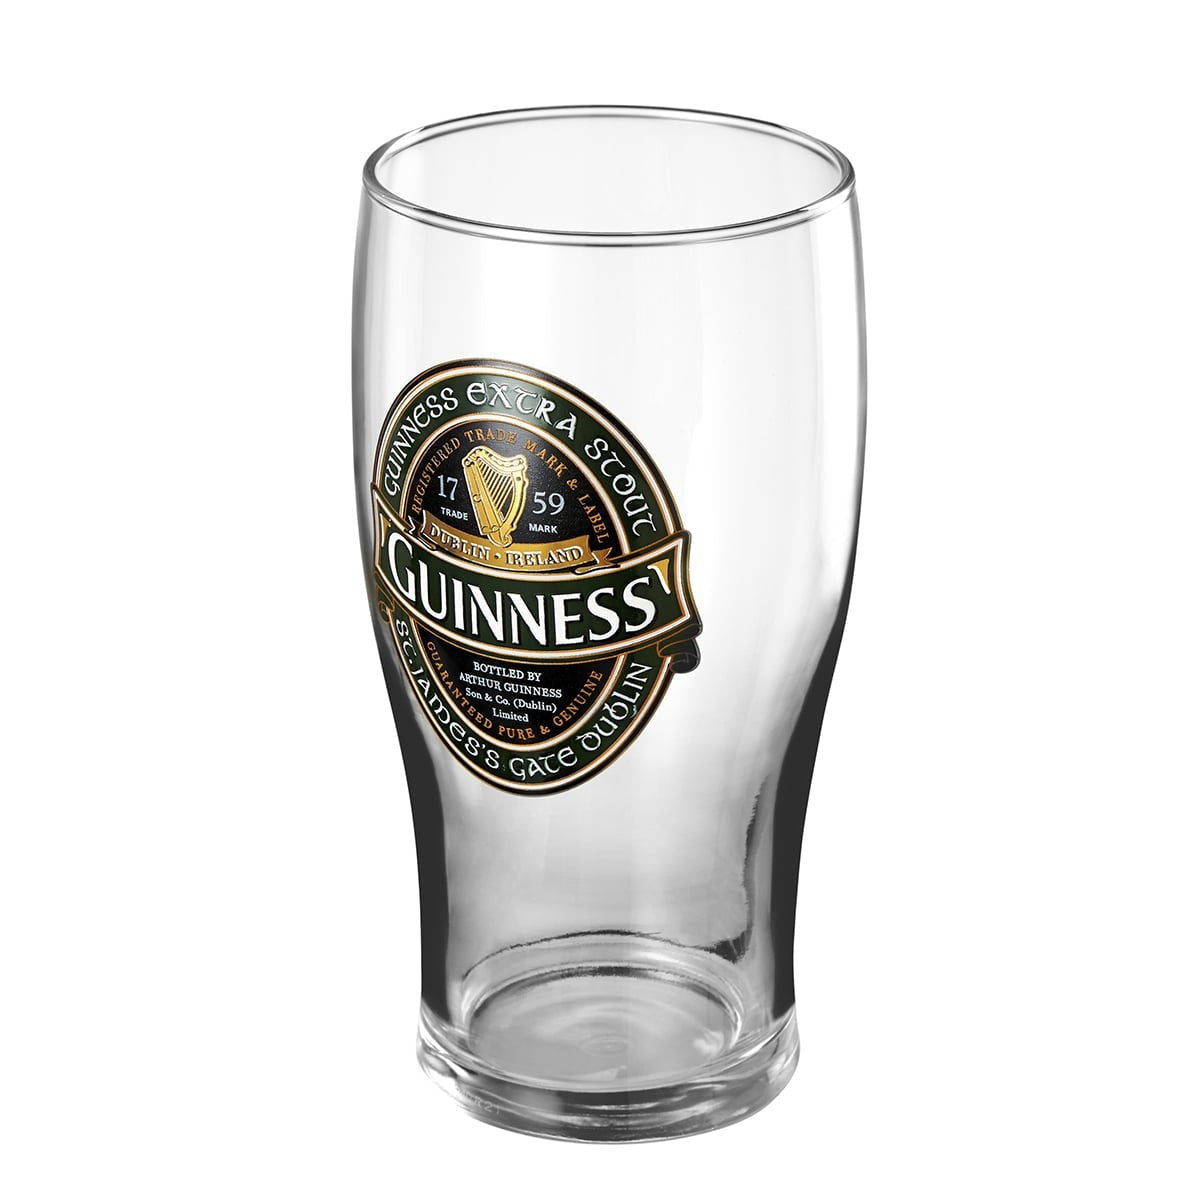 Guinness Ireland Collection Pint Glass - 12 Pack